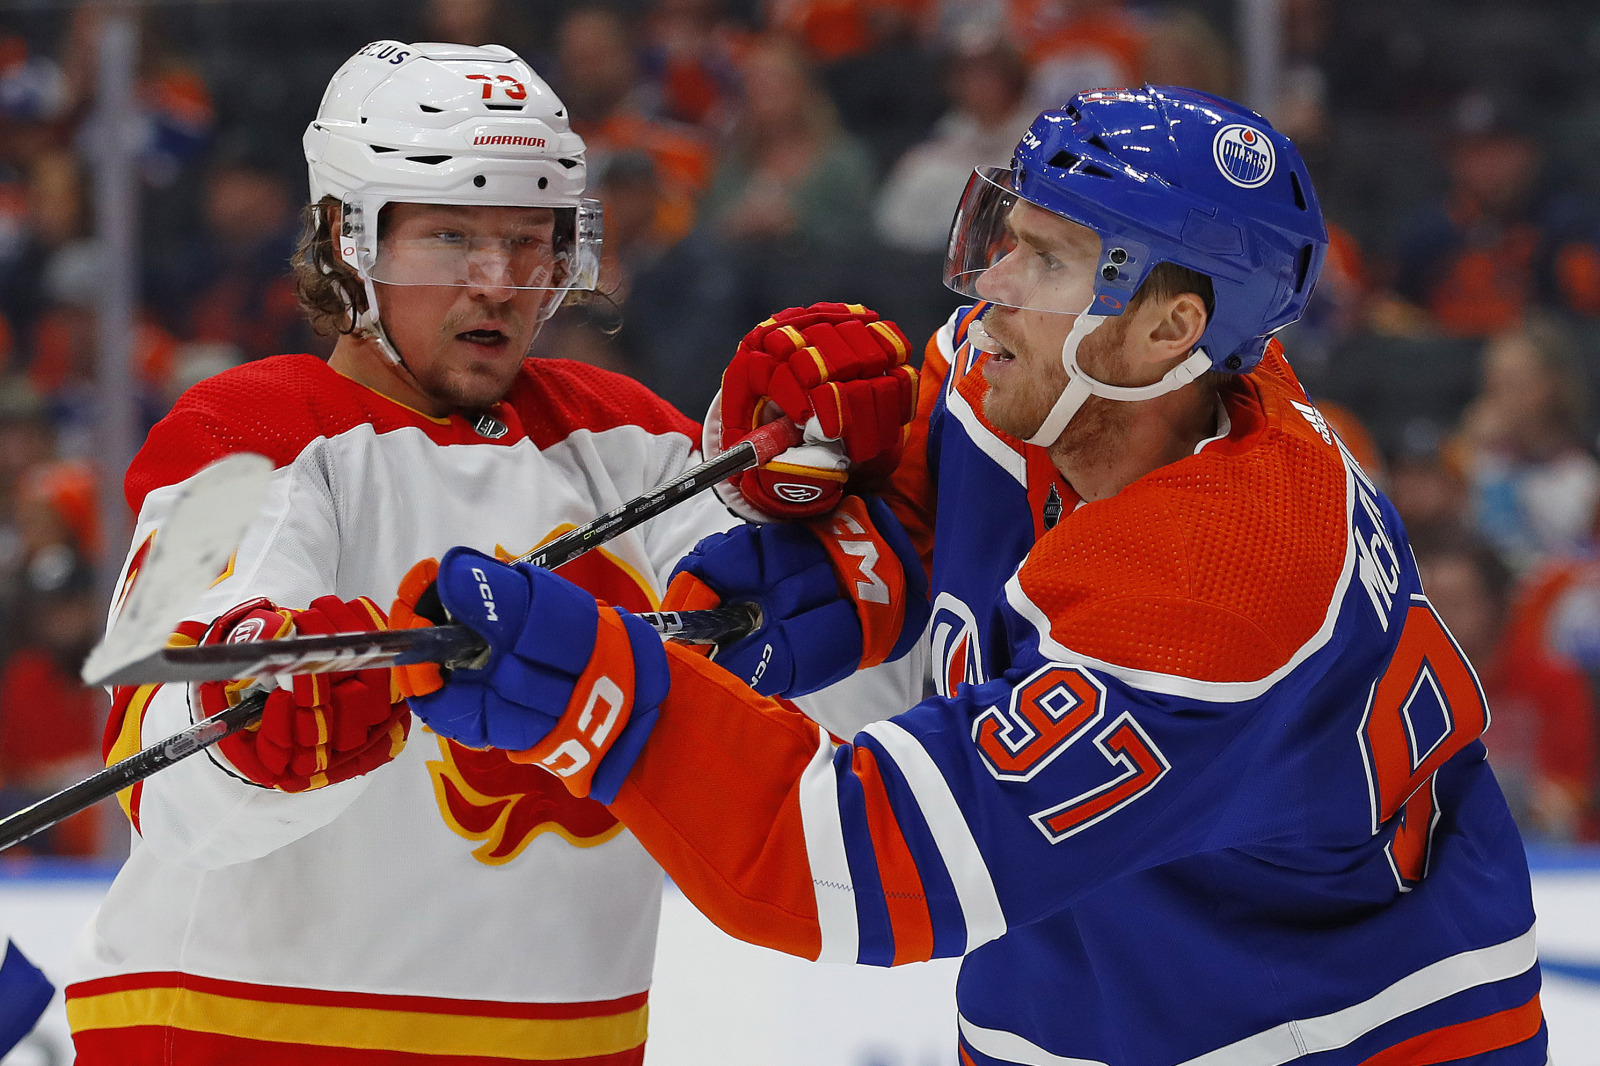 Edmonton Oilers Vs Flames Date, Time, Streaming, Betting Odds, More